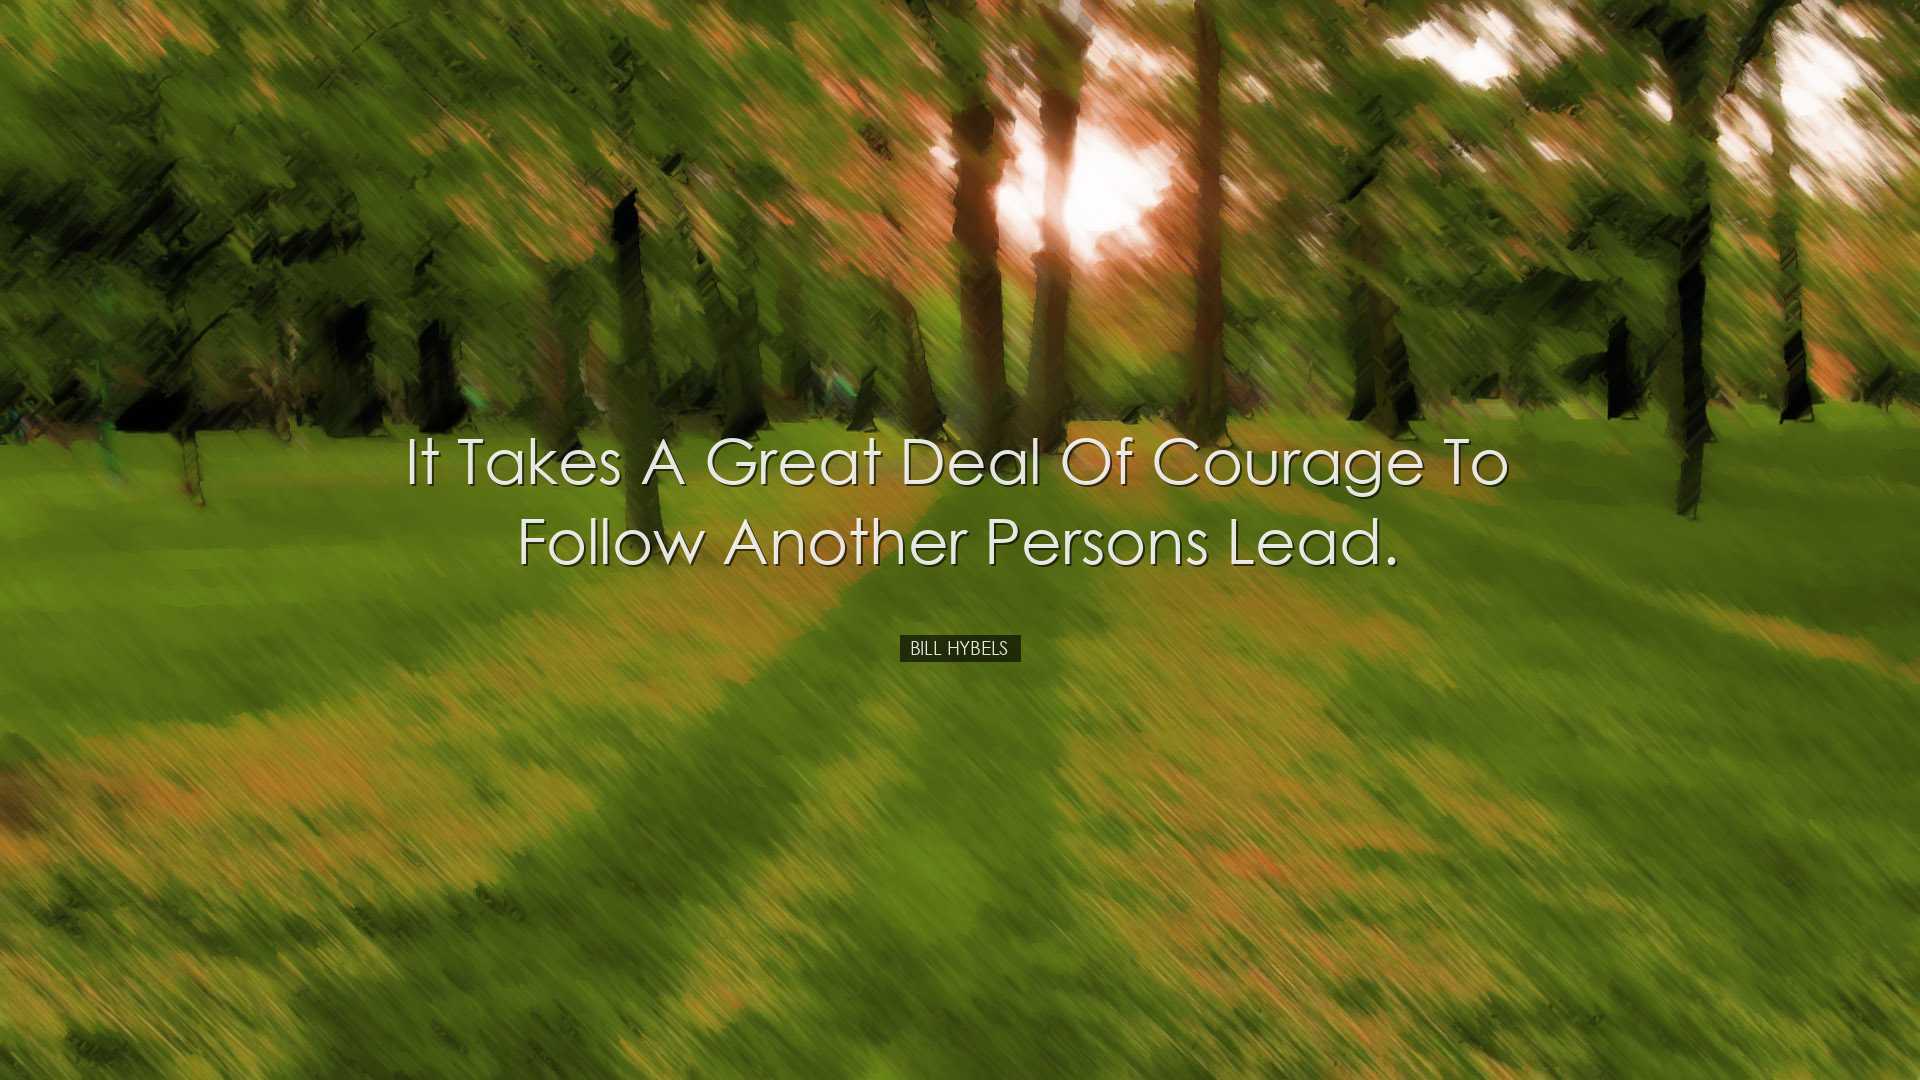 It takes a great deal of courage to follow another persons lead. -